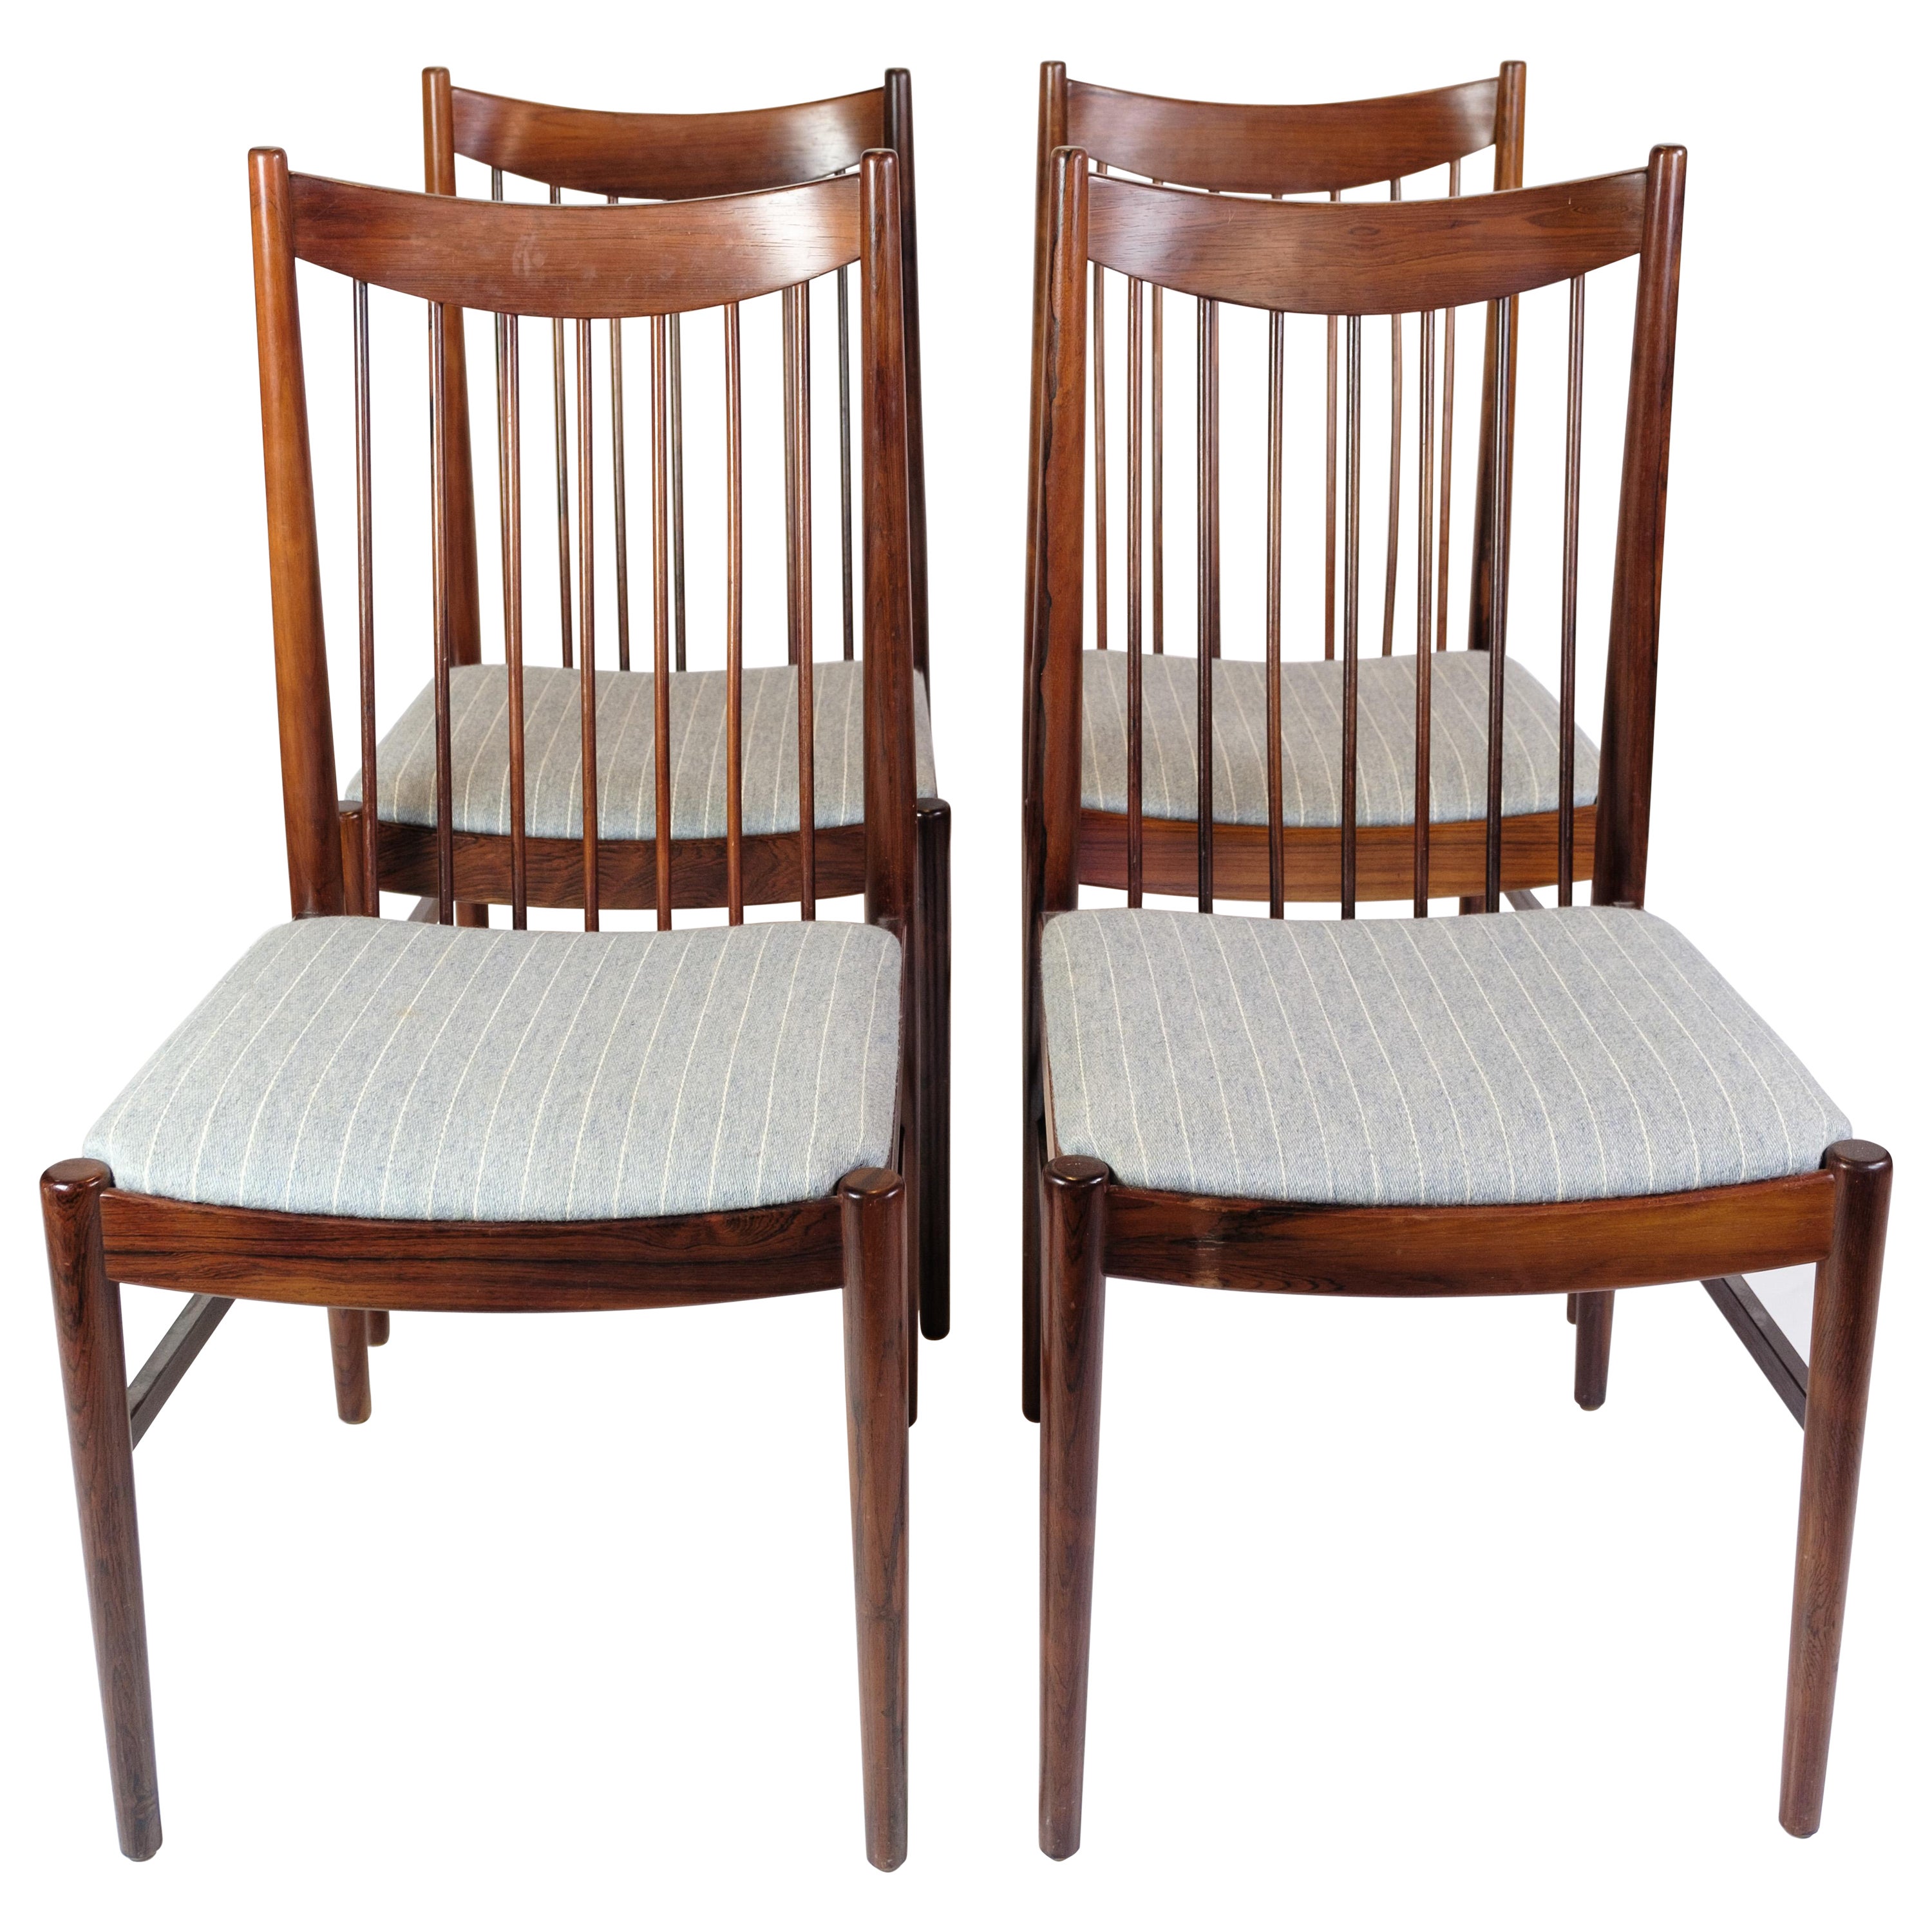 Set Of 4 Dining Room Chairs Model 422 Made In Rosewood By Arne Vodder From 1960s